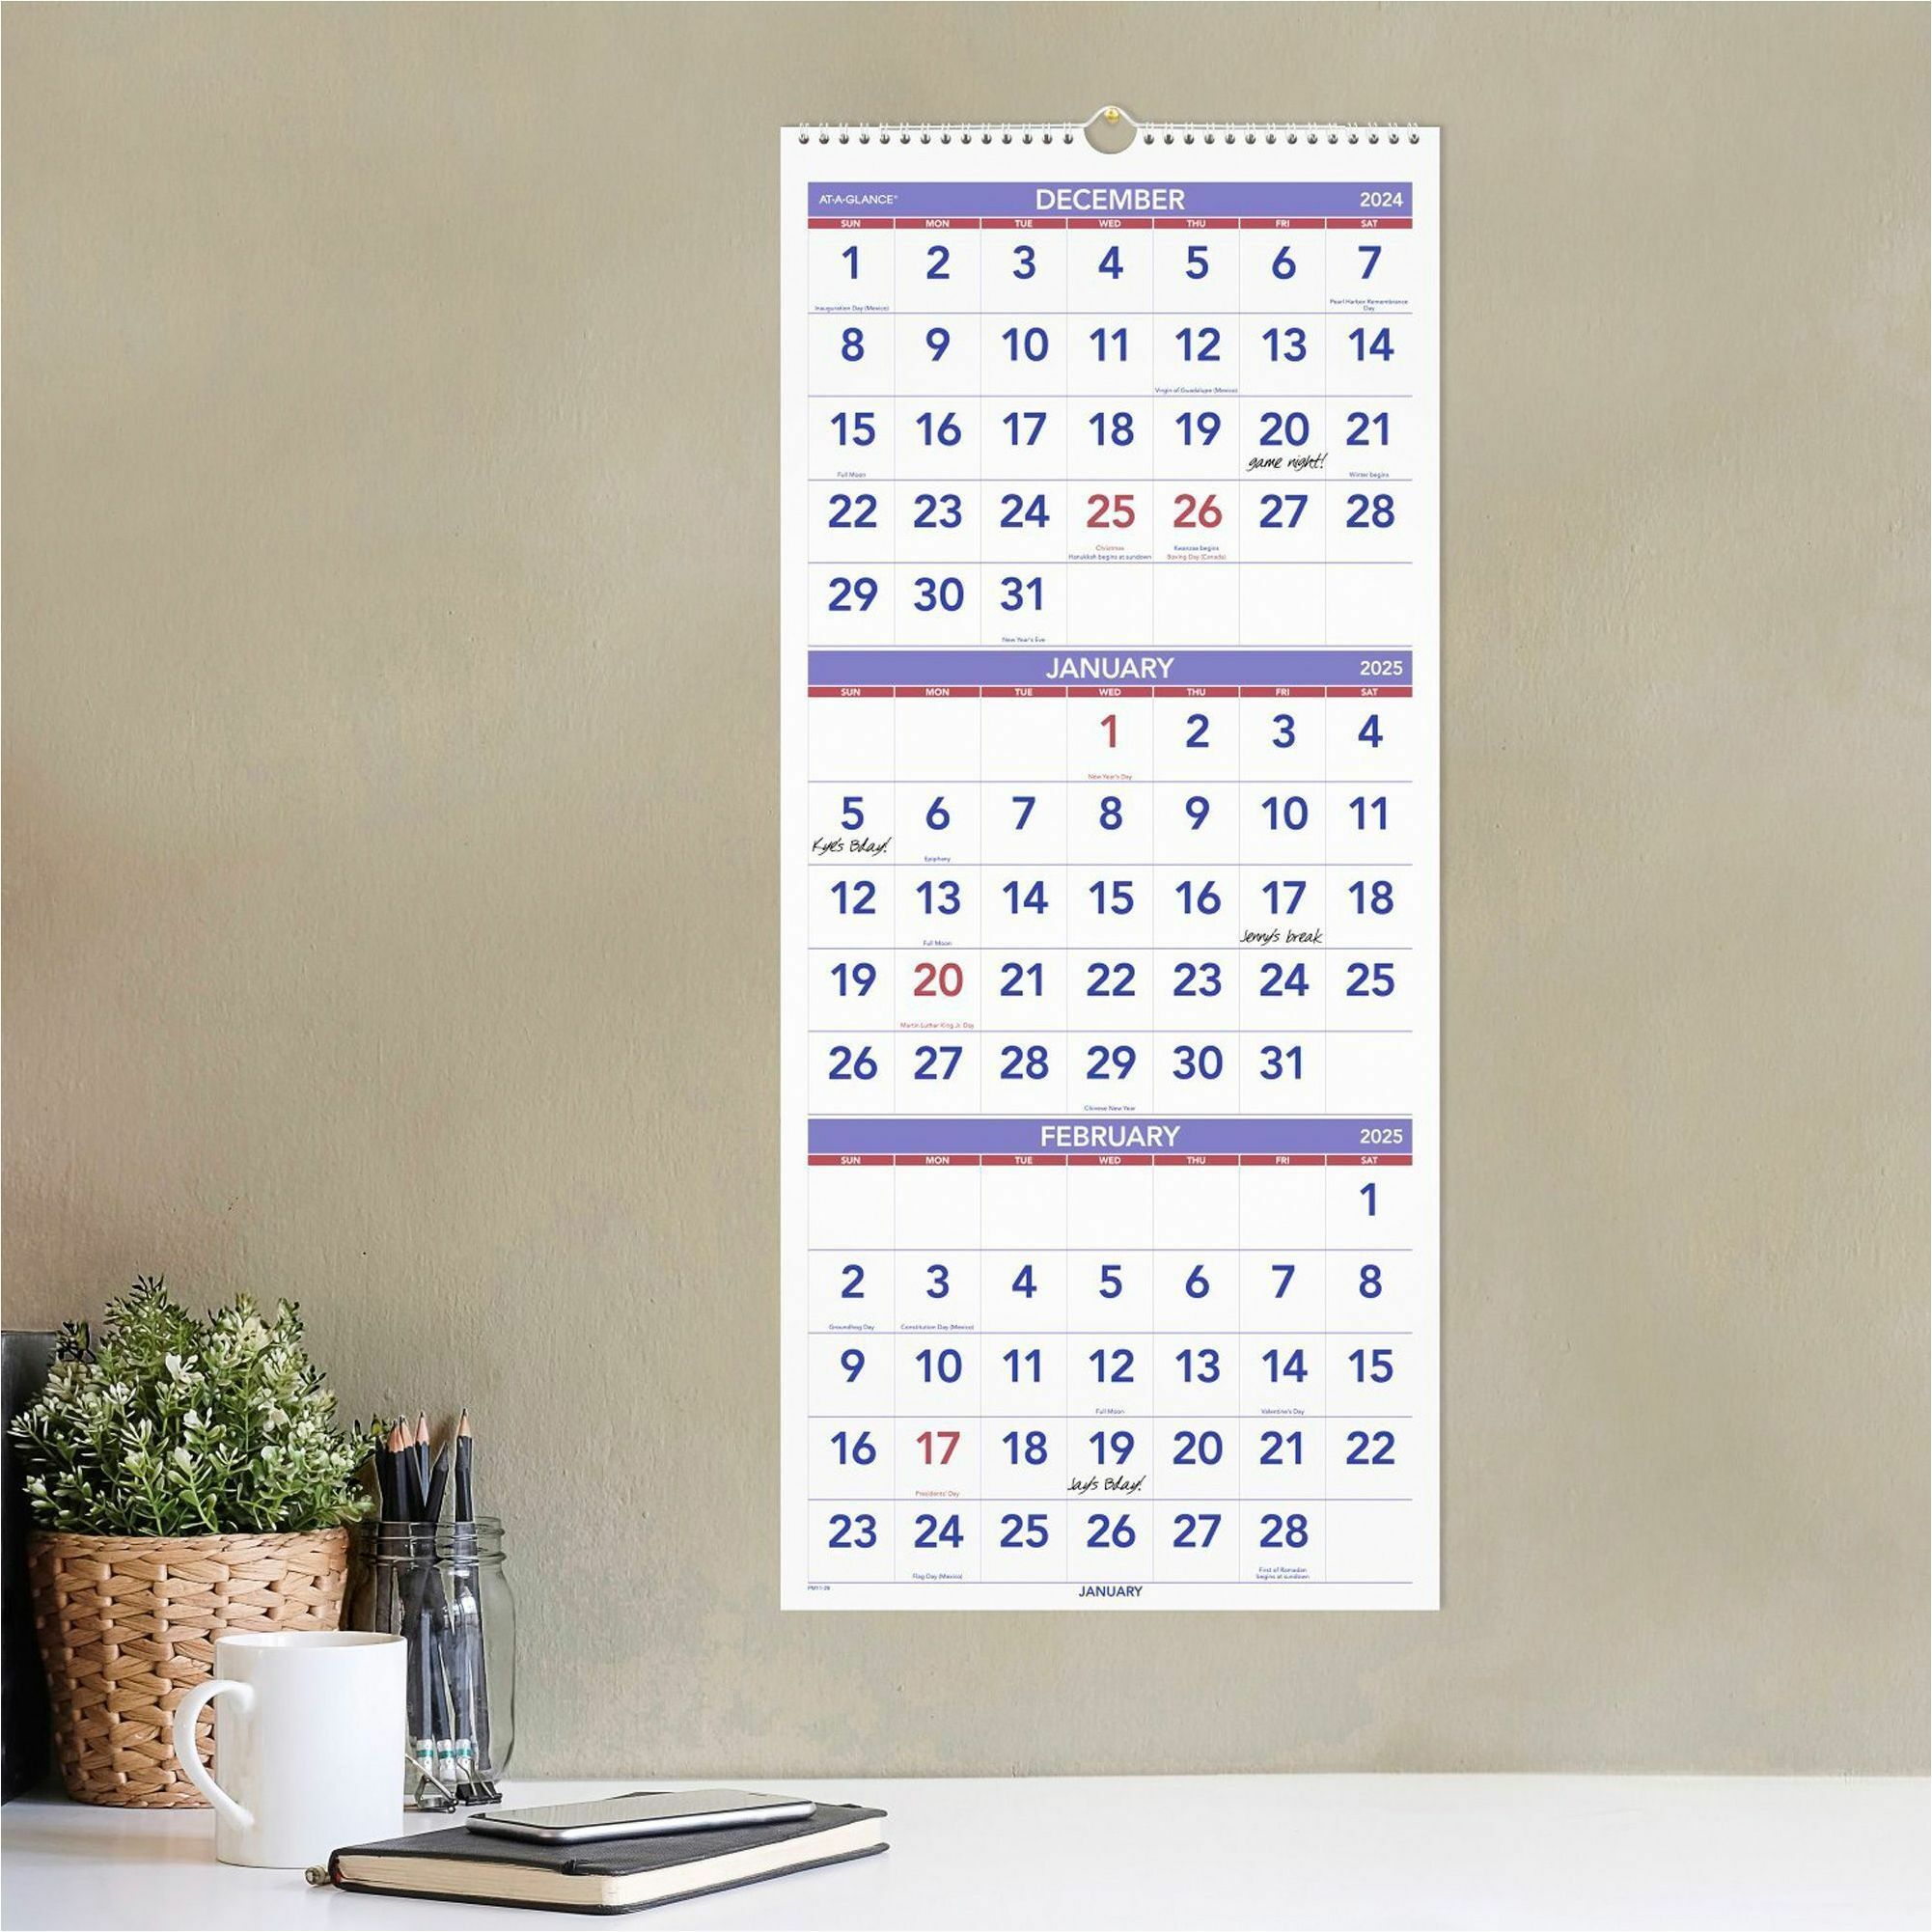 at-a-glance-pm11-28-at-a-glance-3-months-reference-wall-calendar-fast-shipping-office-supply